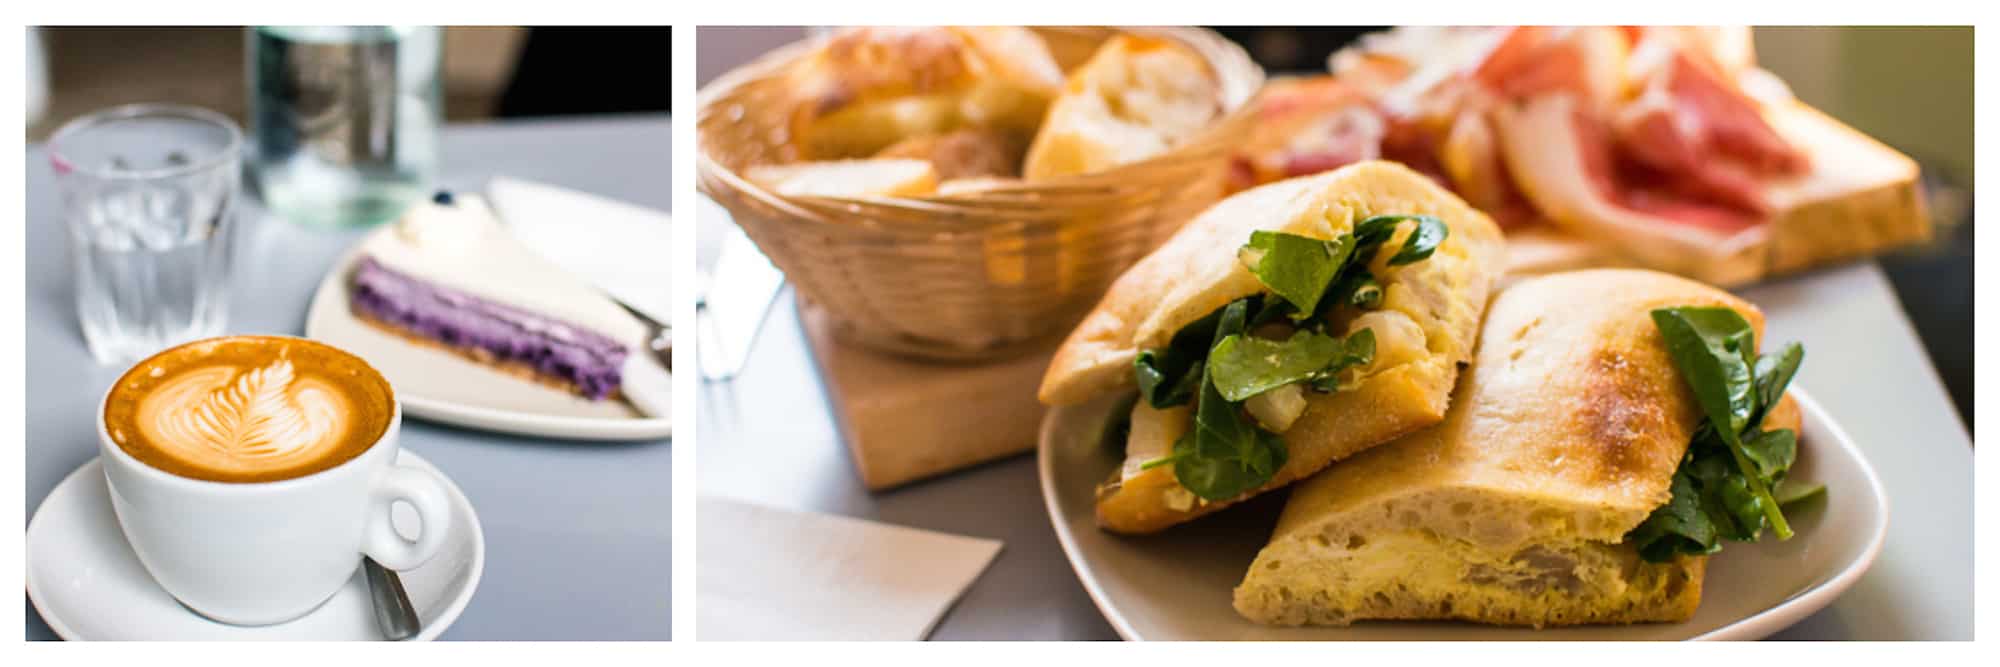 HiP Paris Blog rounds up Paris' best concept store cafes, like at The Broken Arm, which does great coffee (left) and fresh sandwiches (right).